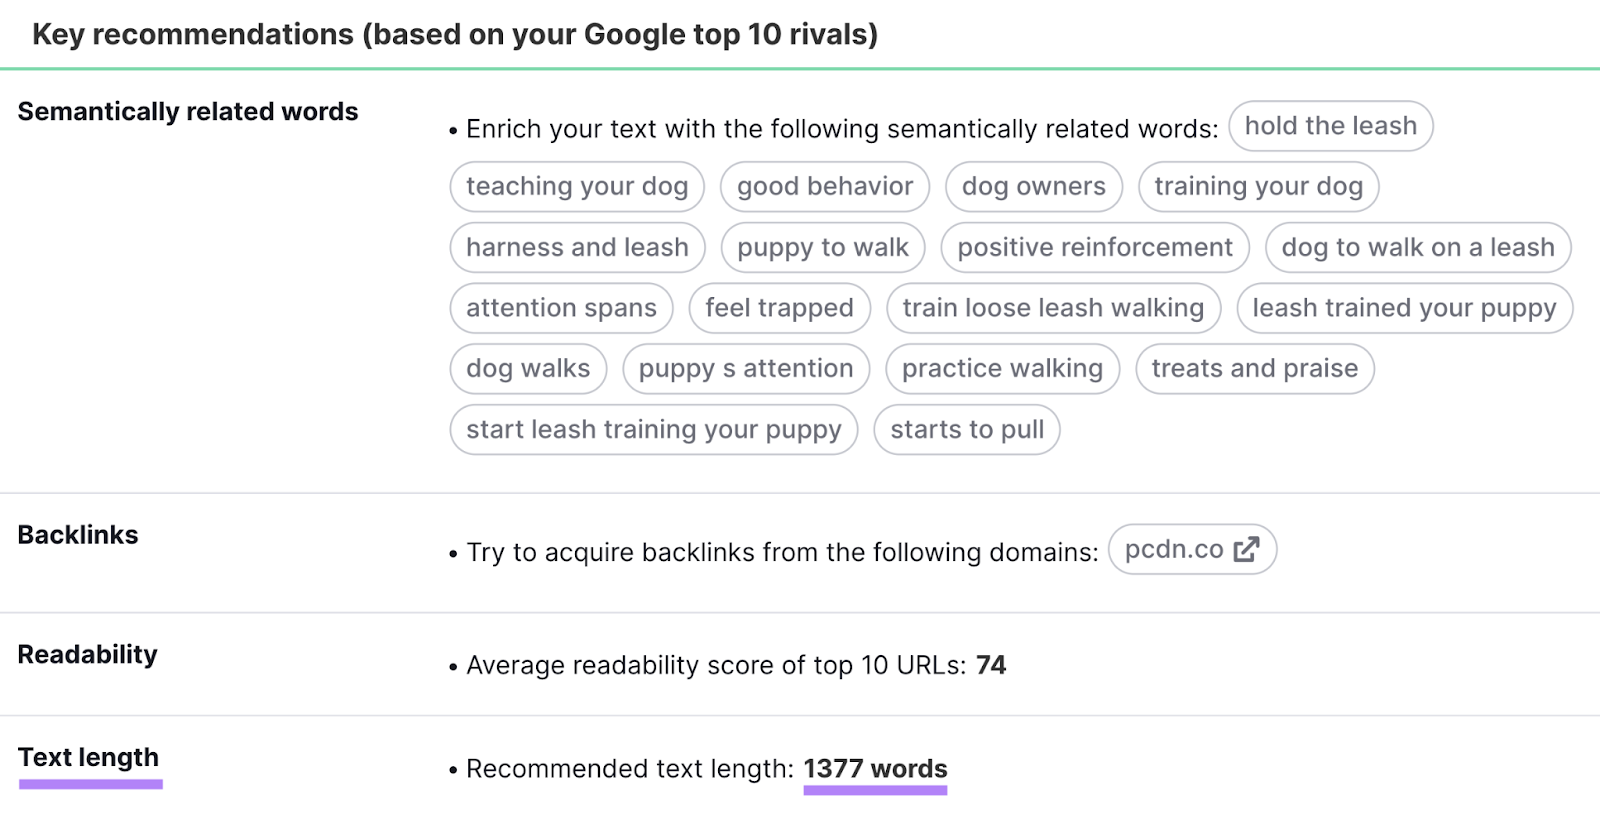 "Text length" row highlighted under "Key recommendations" page in SEO Content Template